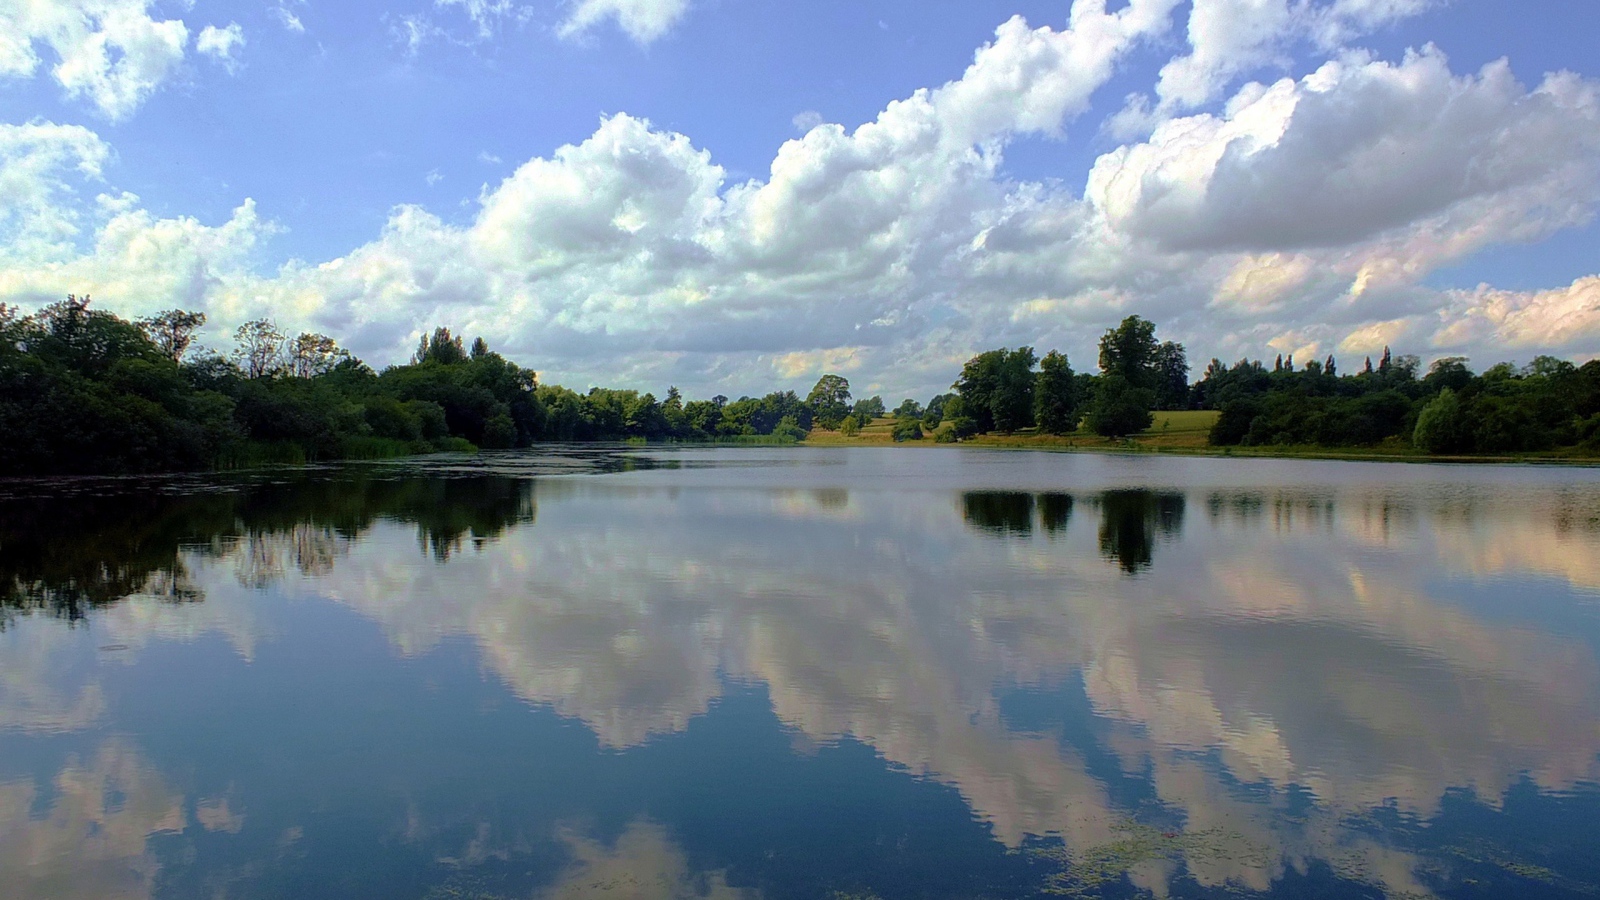 	   Clouds reflected in the lake